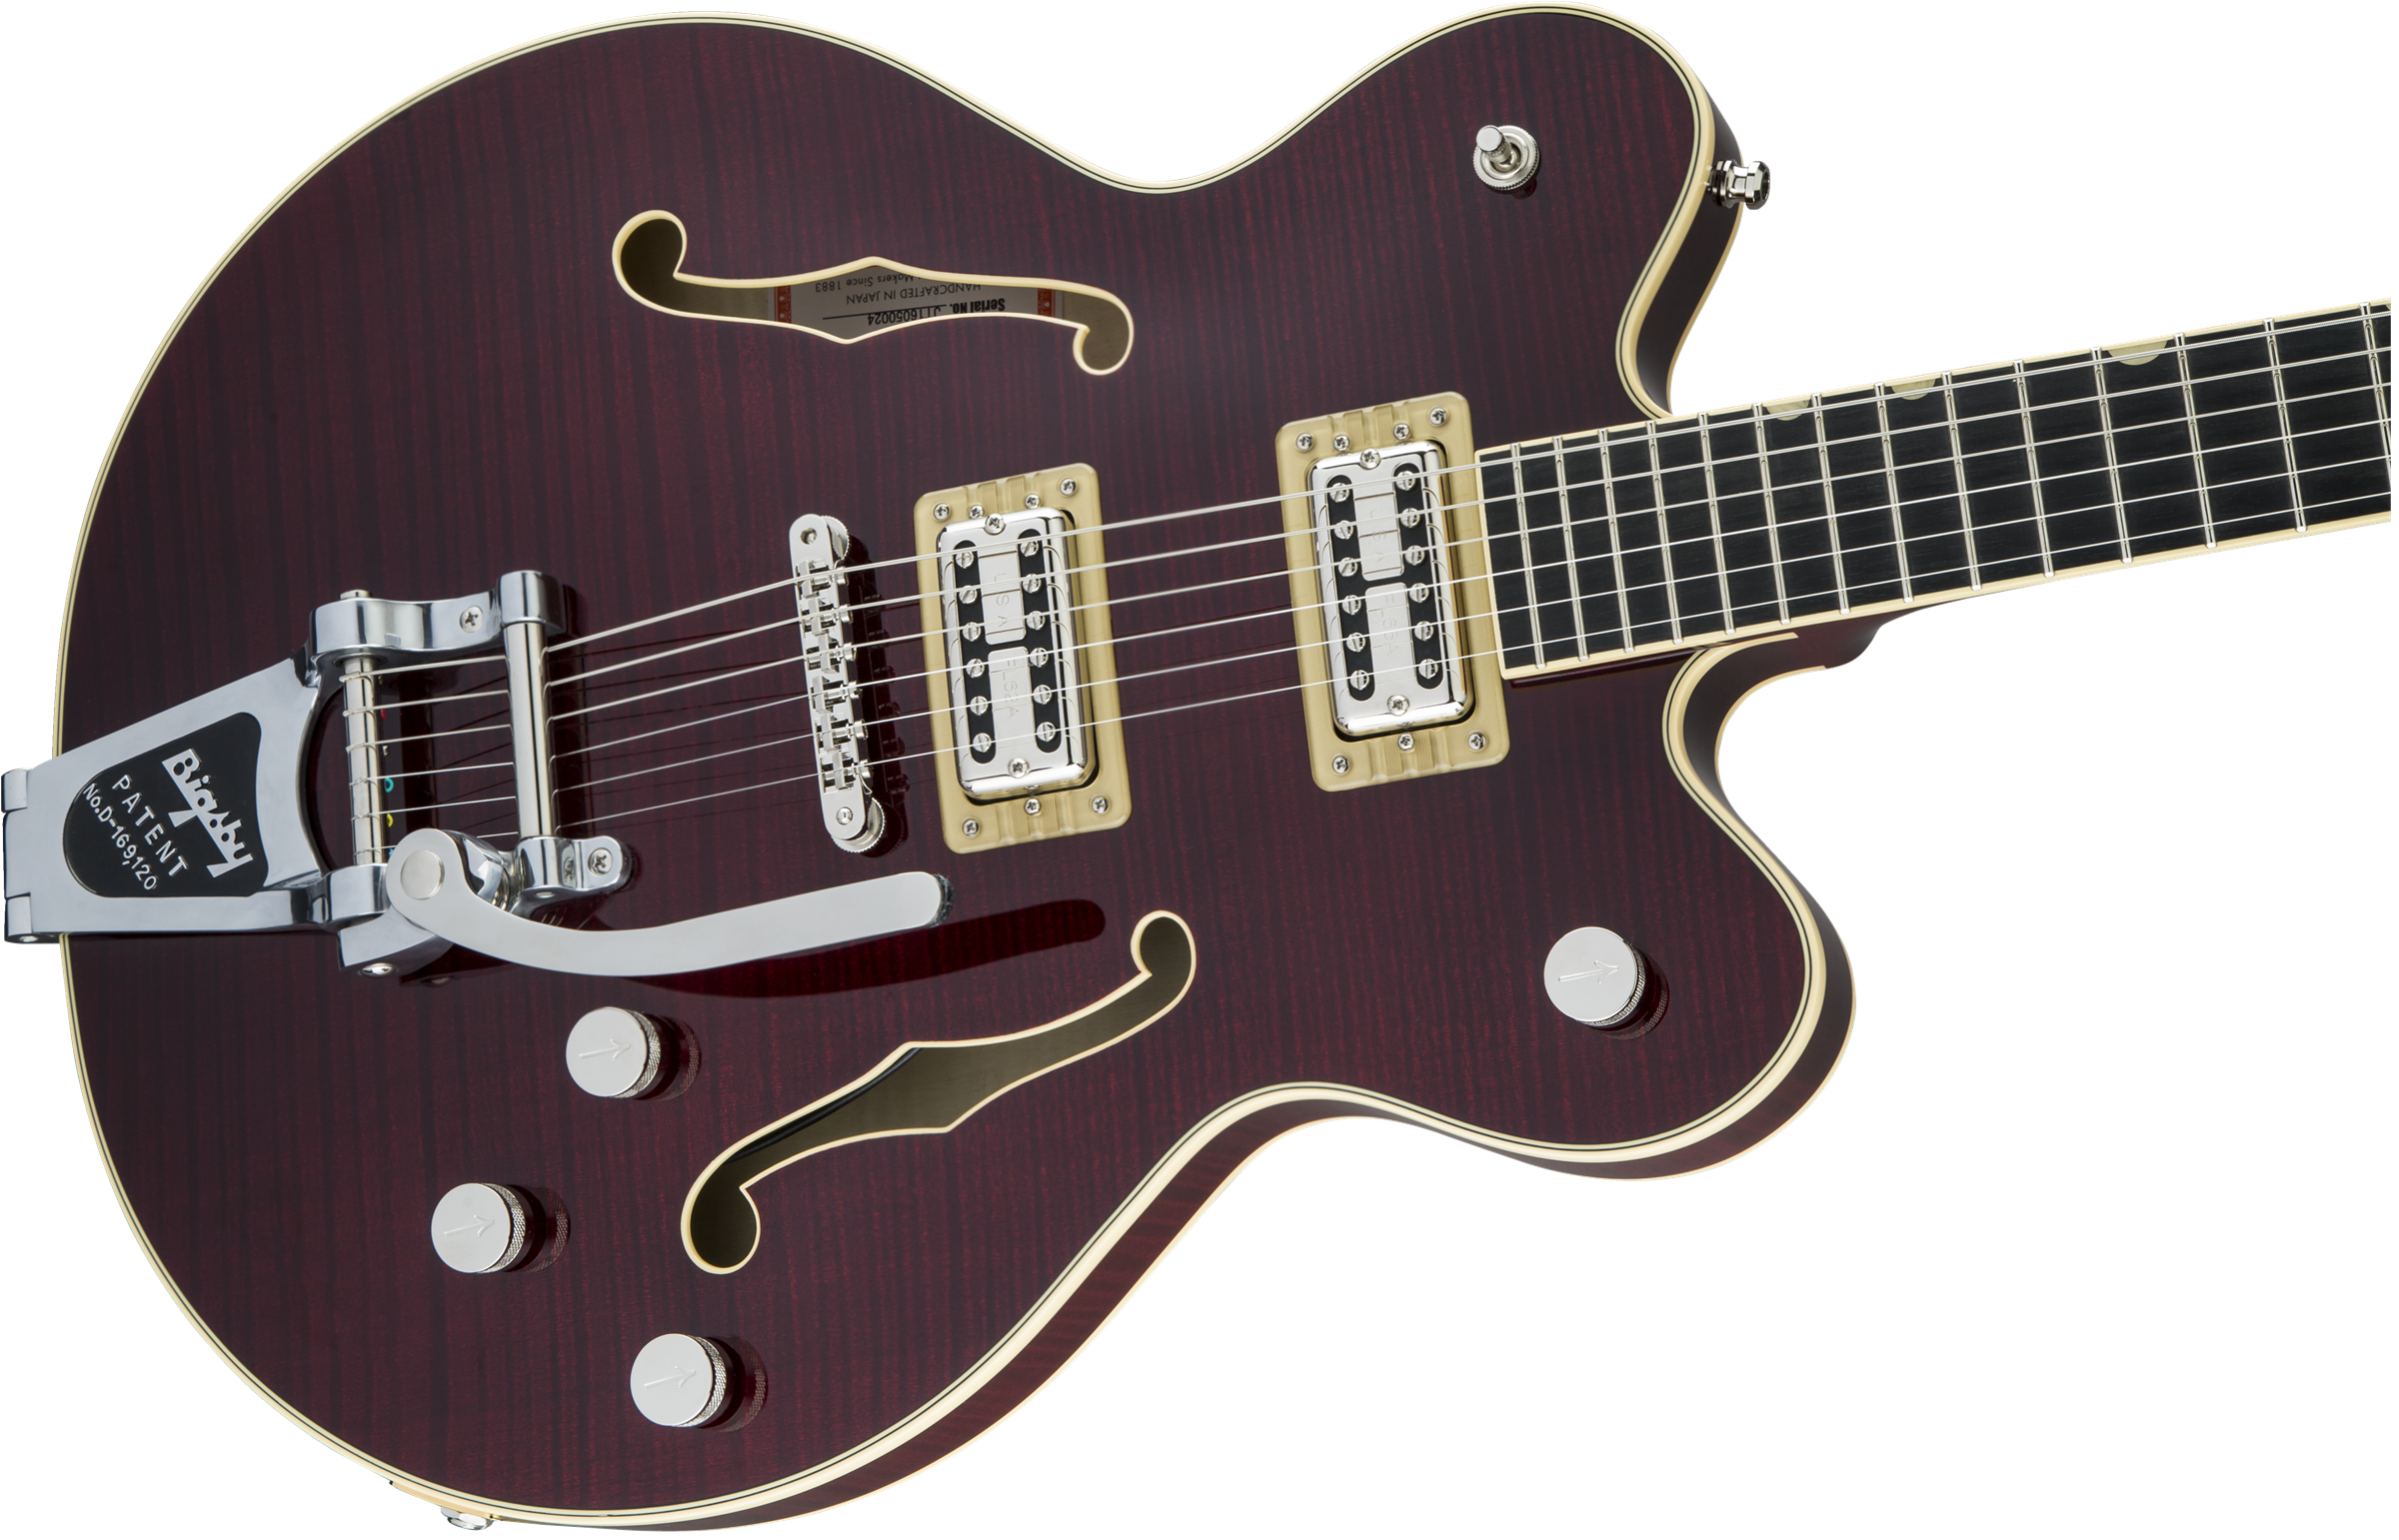 Gretsch G6609TFM Players Edition Broadkaster Center Block Double-Cut with String-Thru Bigsby USA FullTron Pickups Tiger Flame Maple Dark Cherry Stain